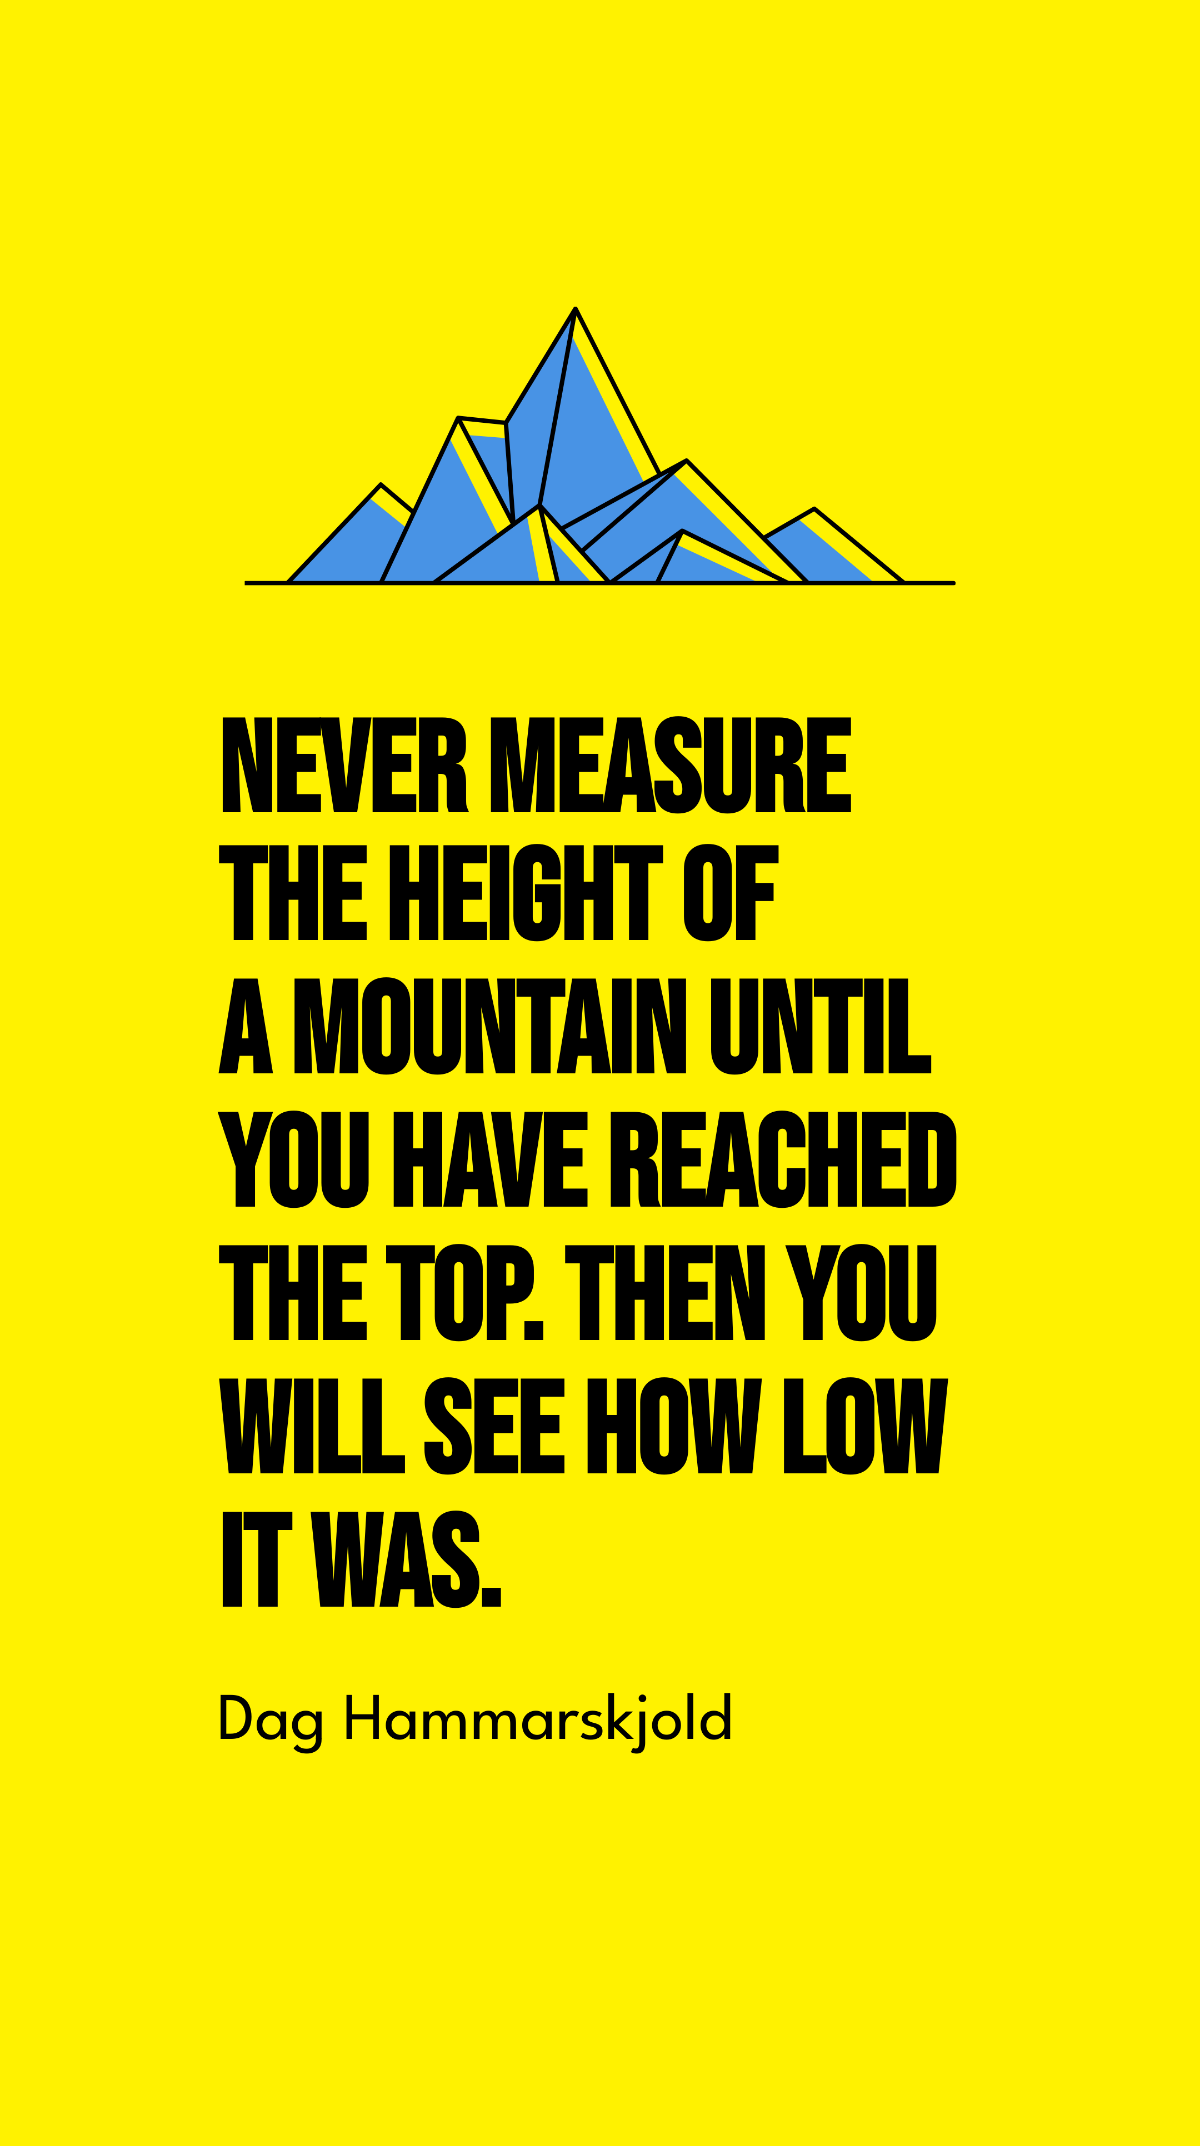 Dag Hammarskjold - Never measure the height of a mountain until you have reached the top. Then you will see how low it was.